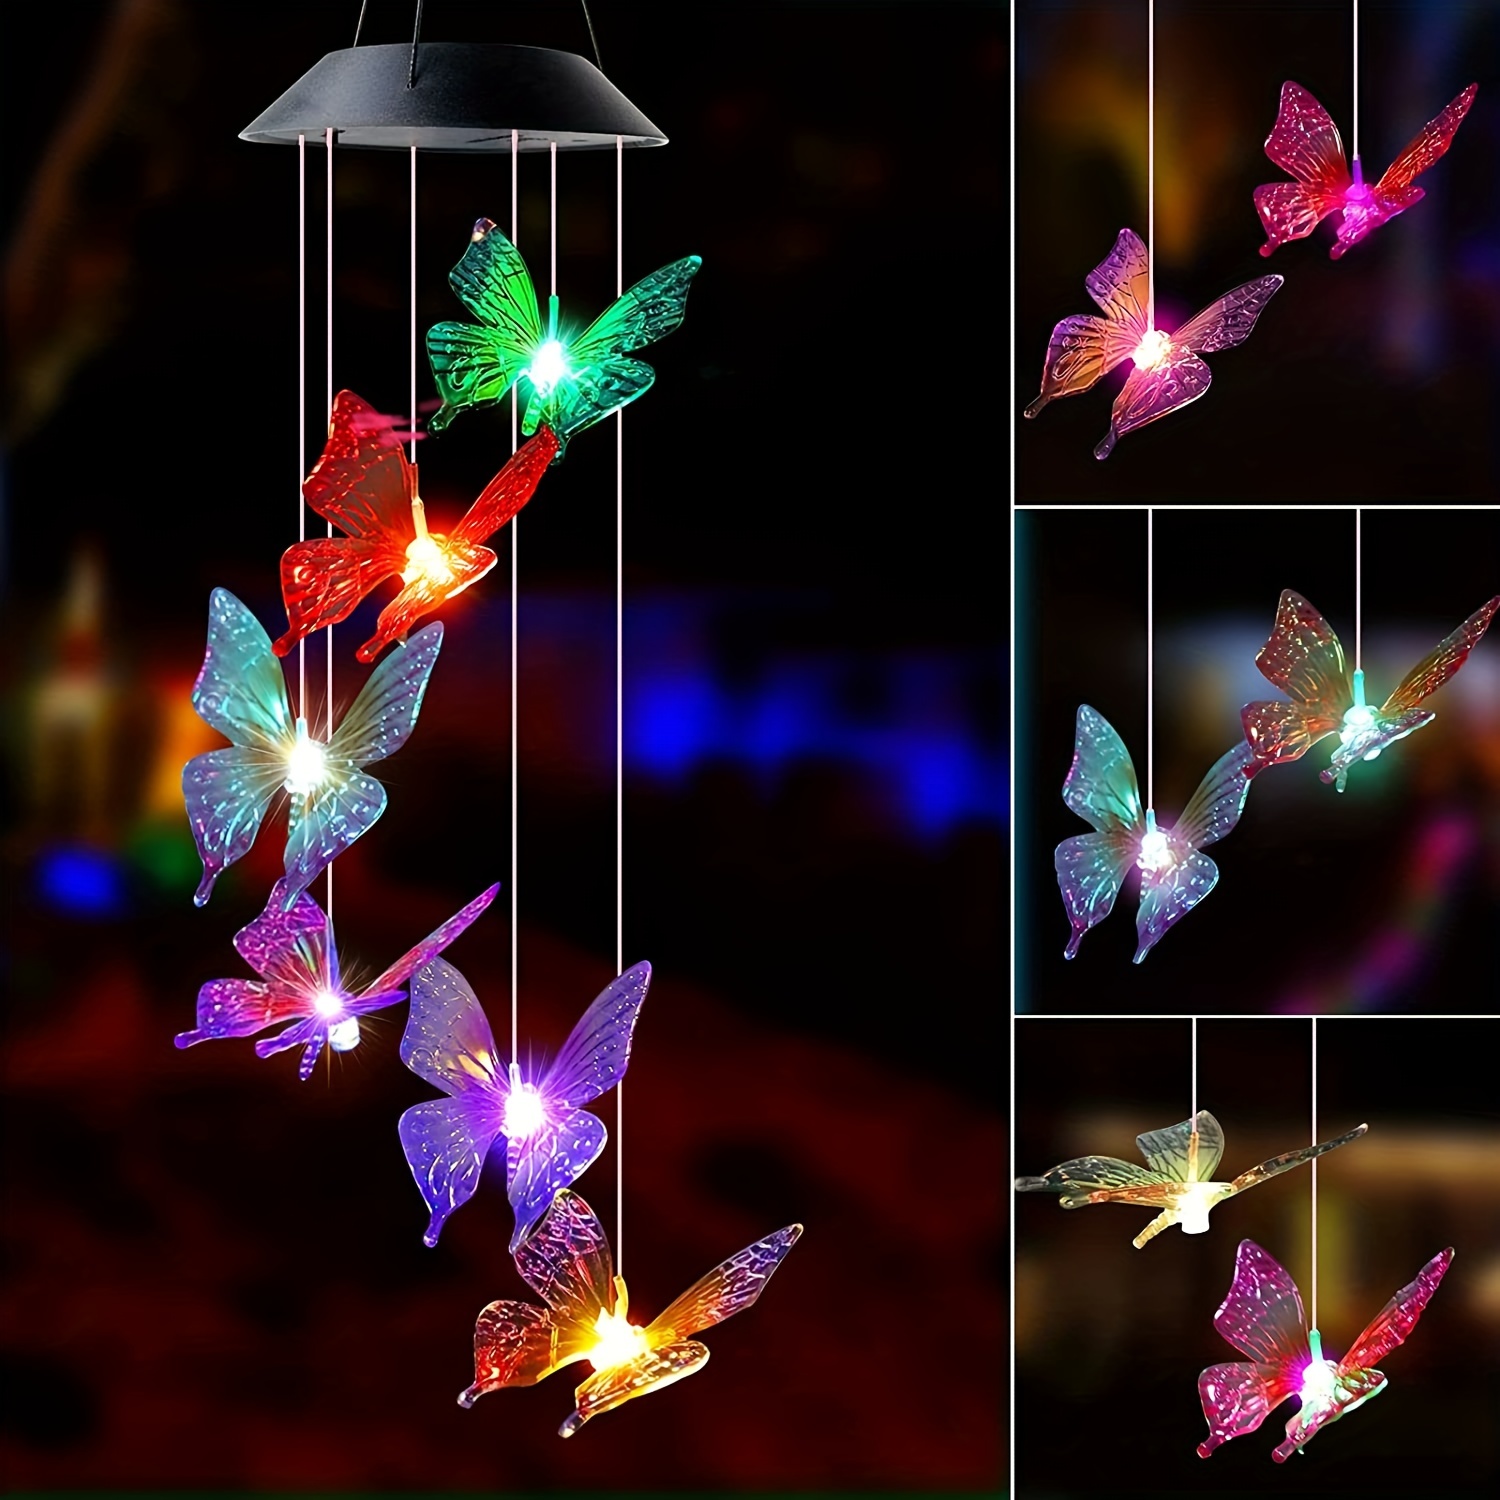 

1pc Solar Wind Chime Butterfly Wind Chimes Light, 6led Color Changing Solar Butterflies Wind Chime, Waterproof Romantic Solar Powered Butterfly Lights, Home, Yard, Balcony, Outdoor Garden Decoration